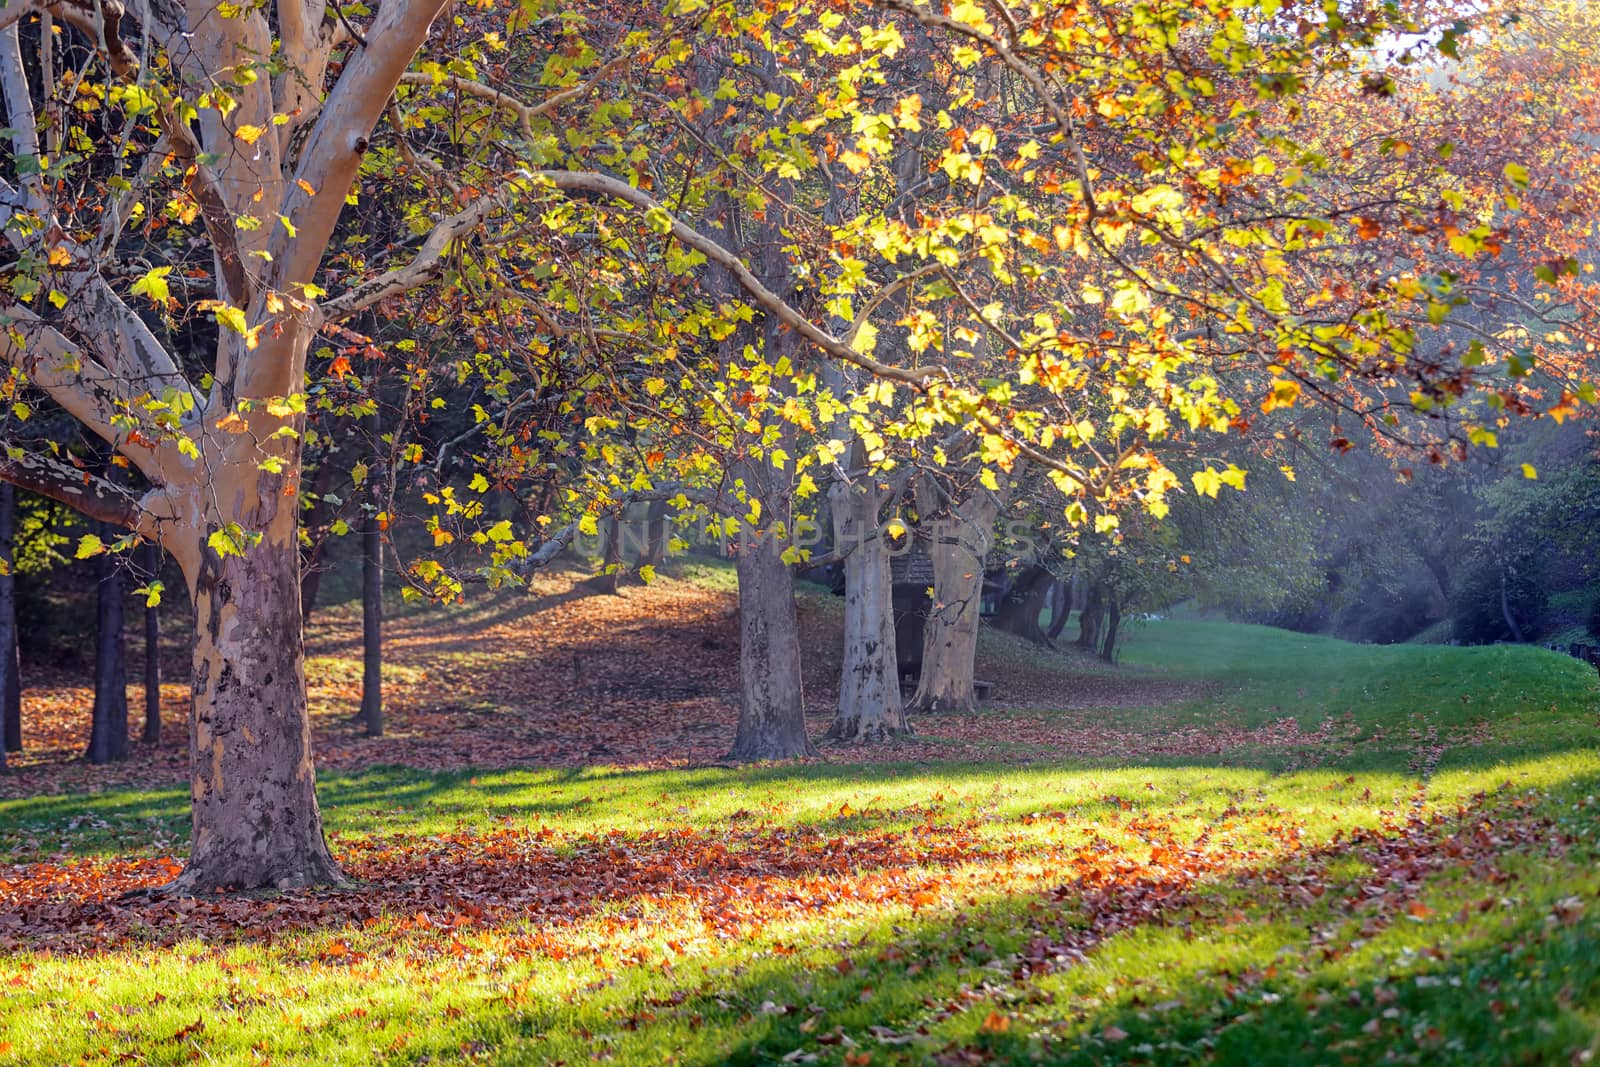 trees with fallen leaves in the park